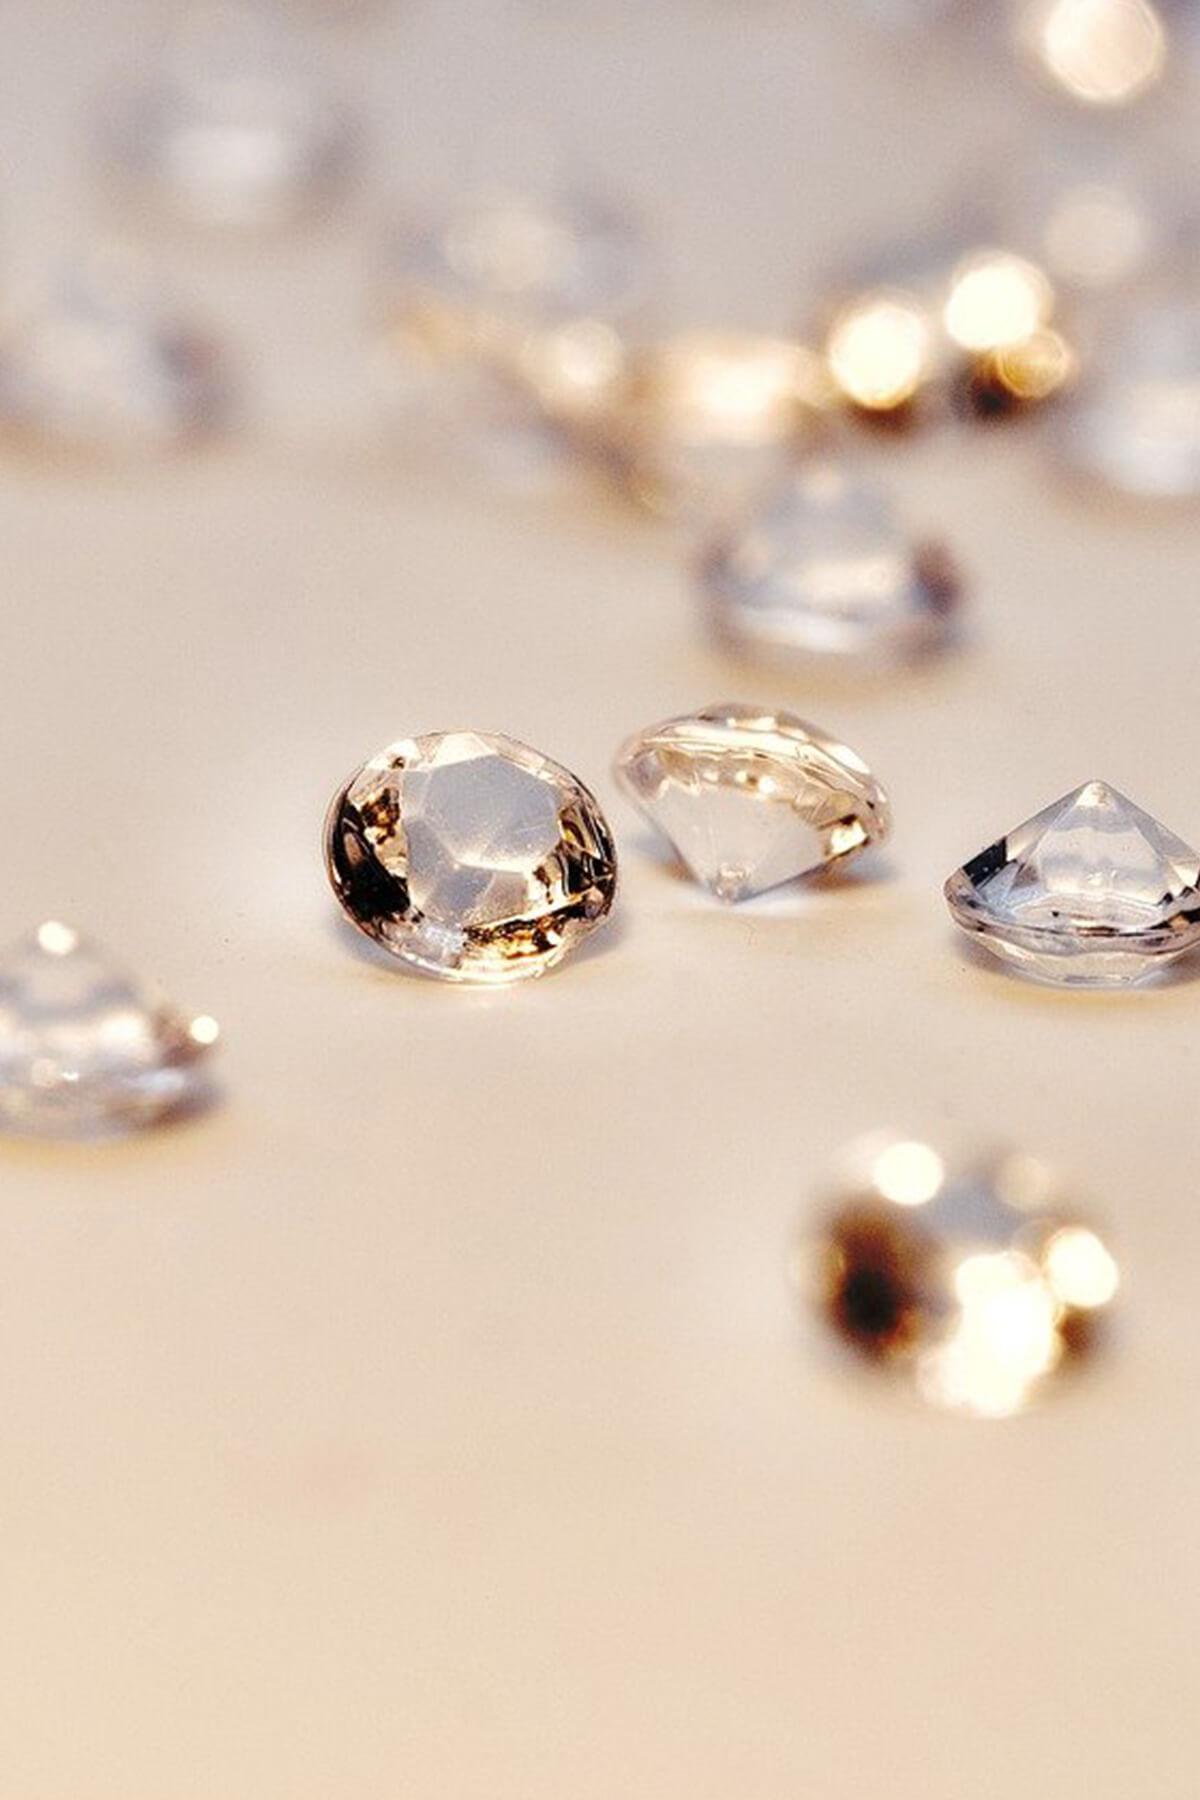 Diamonds, their meaning: because we attribute value and charm to them